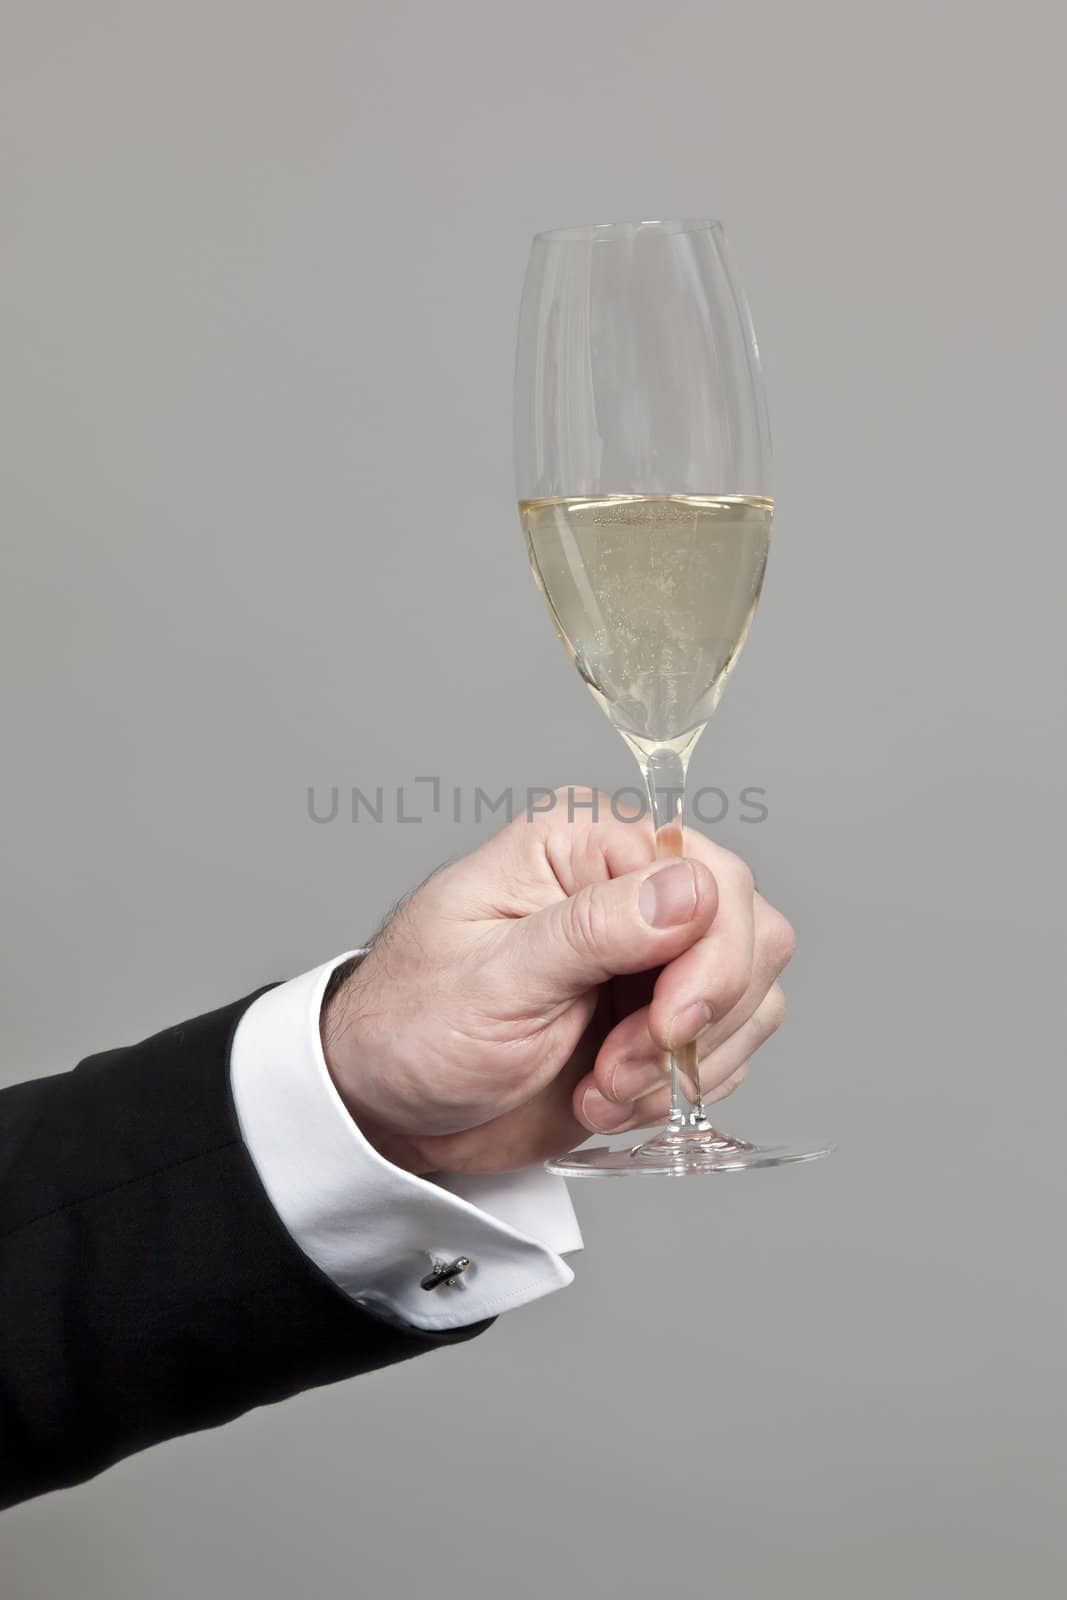 An image of a beautiful glass of bubble